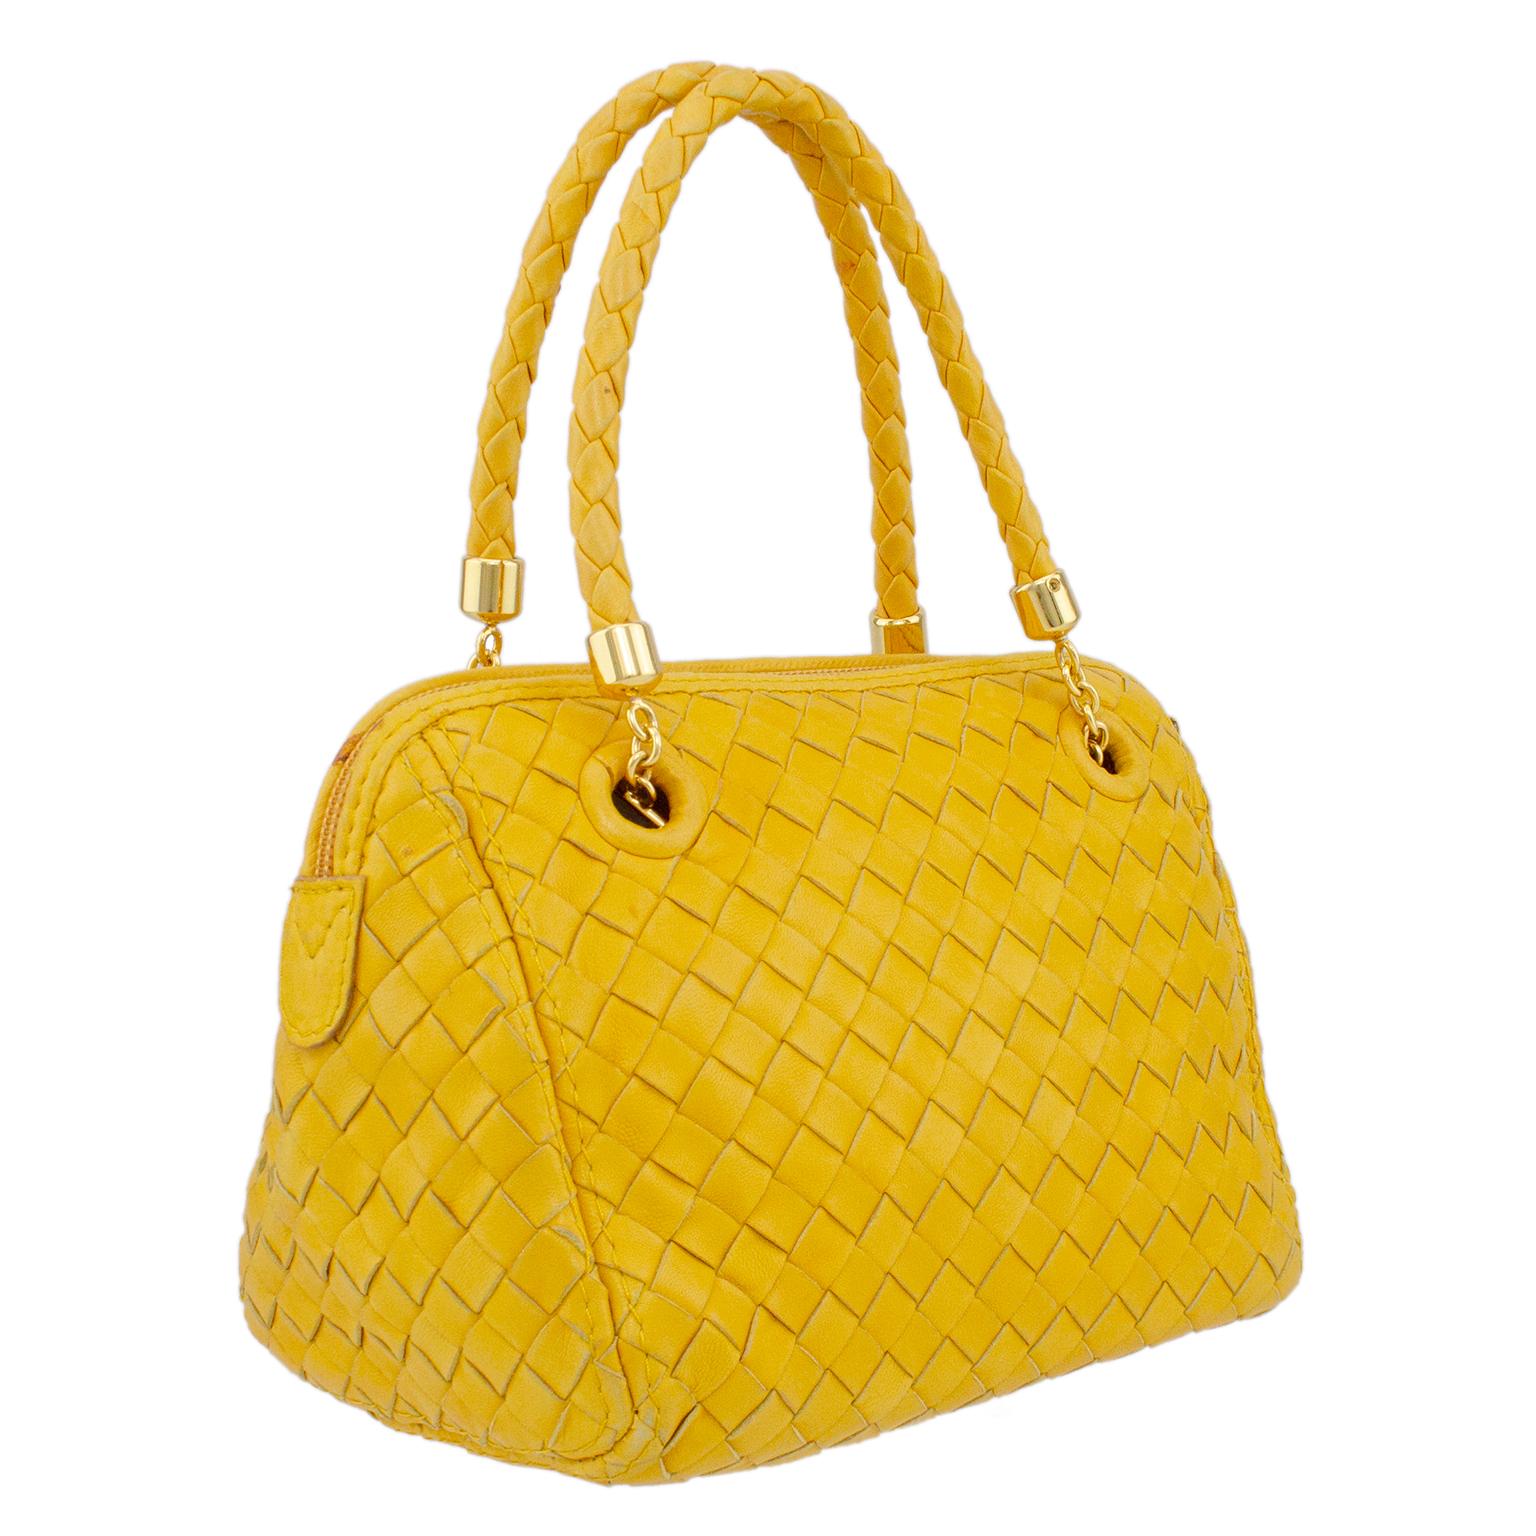 Very cute Bottega Veneta bag from the early 2000s. Mustard yellow leather, cut and weaved into the iconic Bottega intrecciato pattern. Matching top handles with gold tone metal hardware and a small tassel zipper pull. Tan leather interior with one